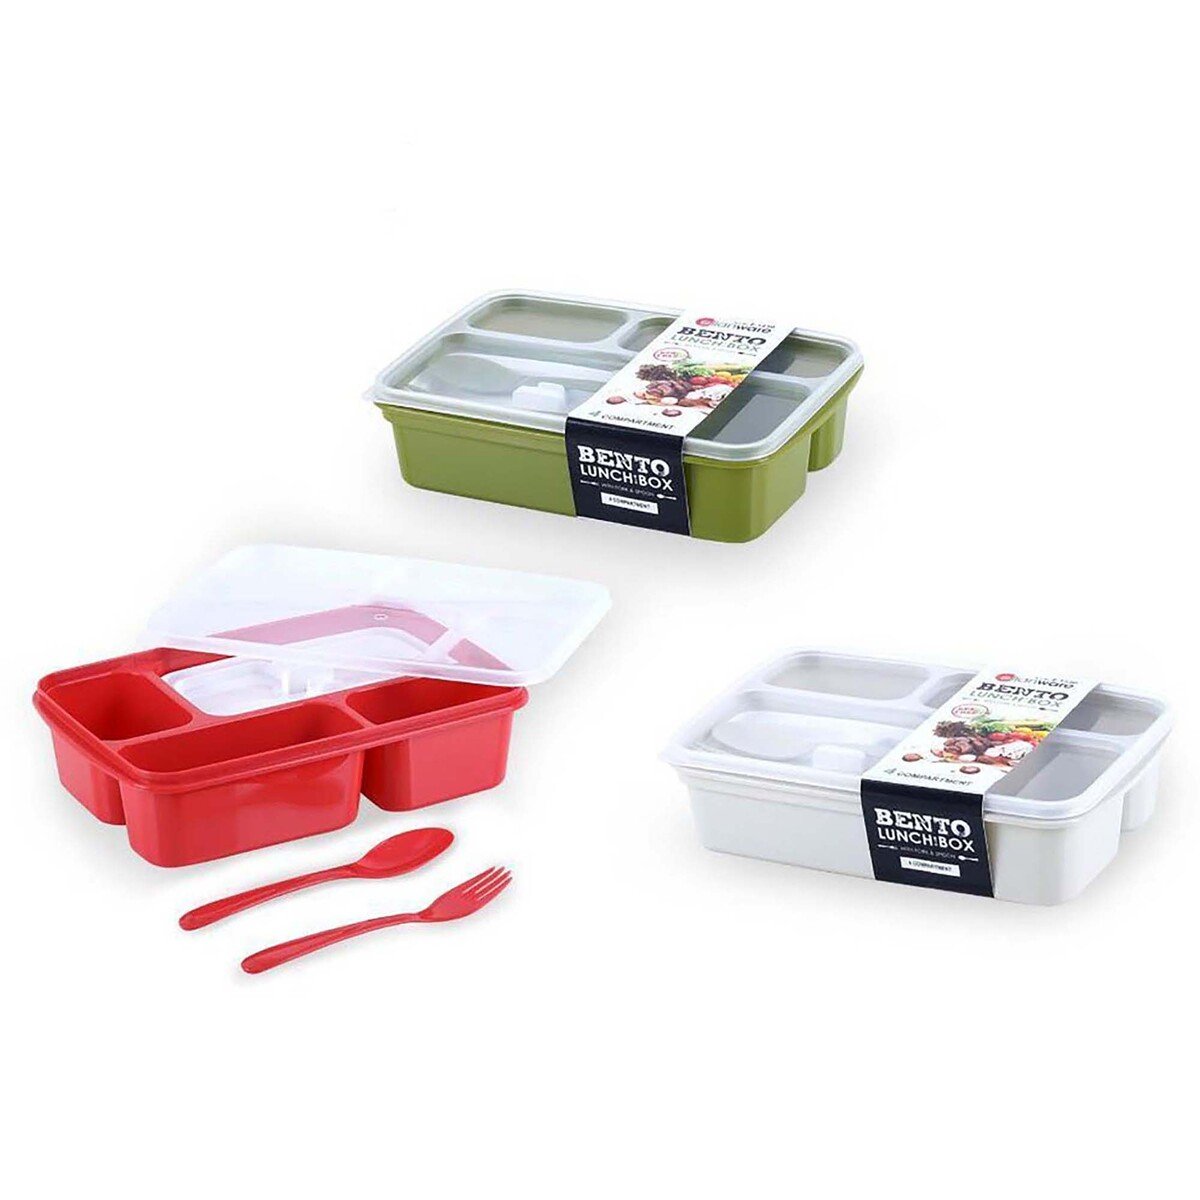 Elianware Lunch Box With Spoon and Fork E-1230 1.3L Assorted